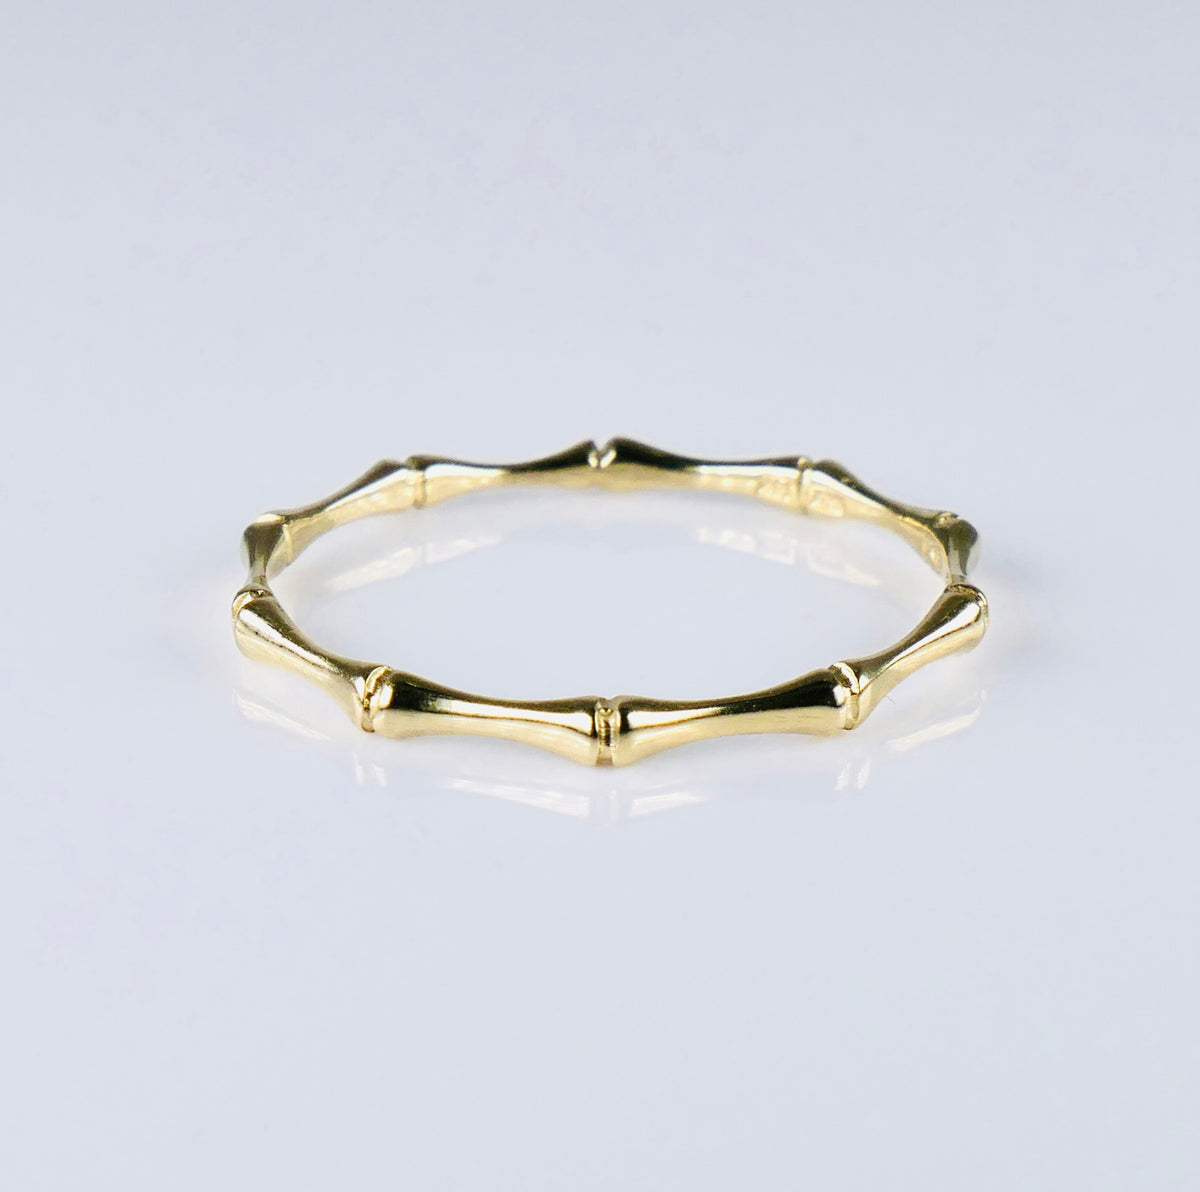 14K Yellow Gold 1.8mm Bamboo Stackable Band Ring